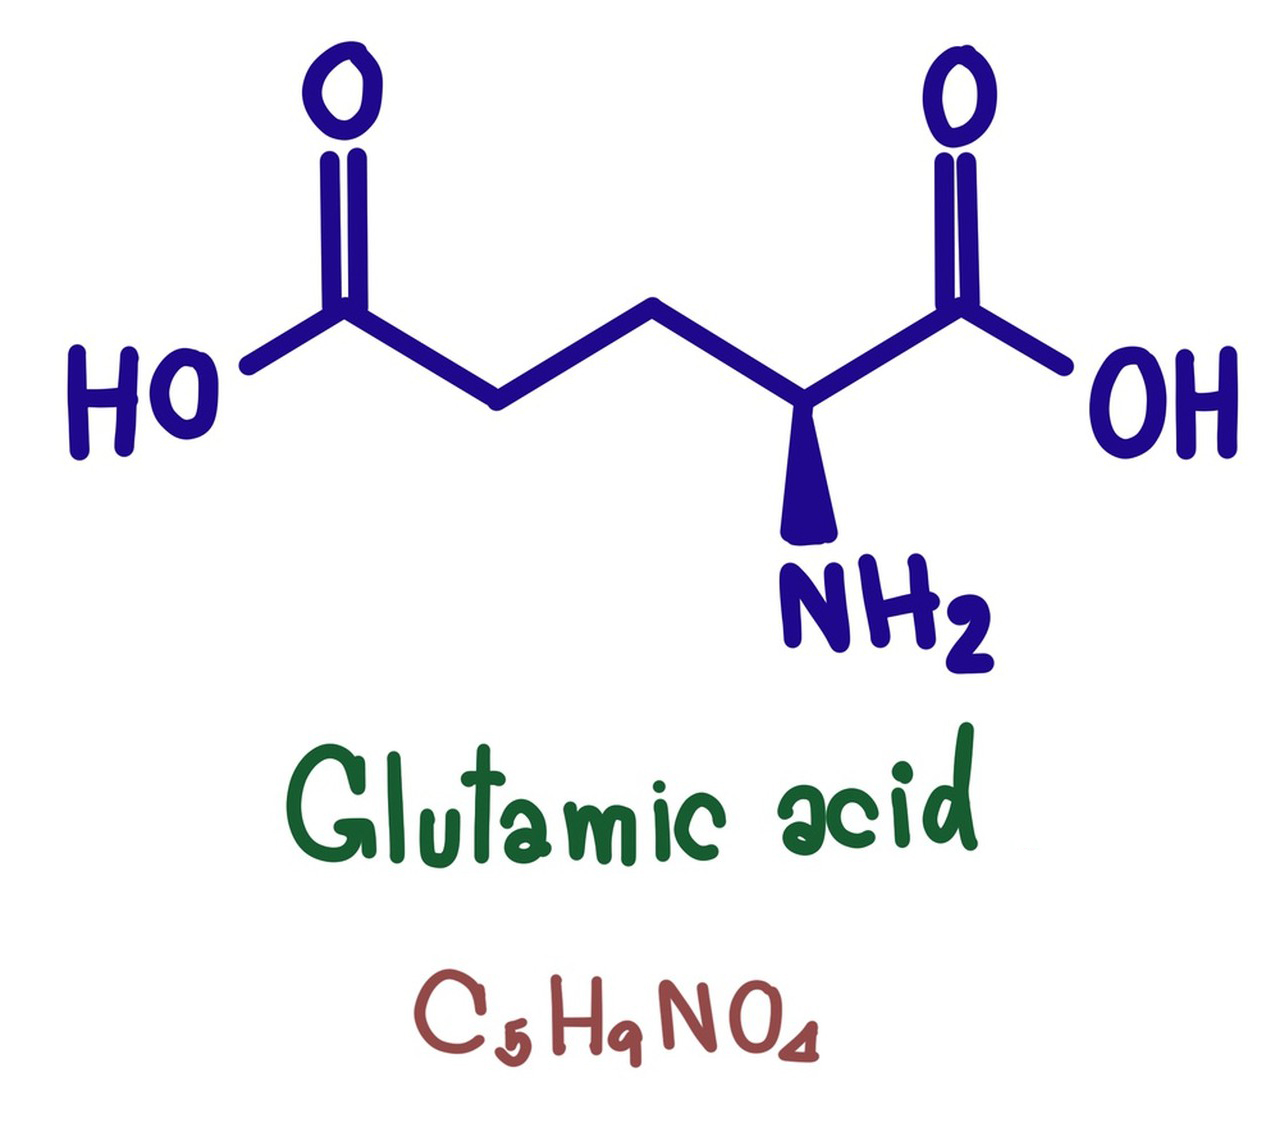 Chemical structure and physical properties of L-Glutamic Acid-Xi'an Lyphar Biotech Co., Ltd